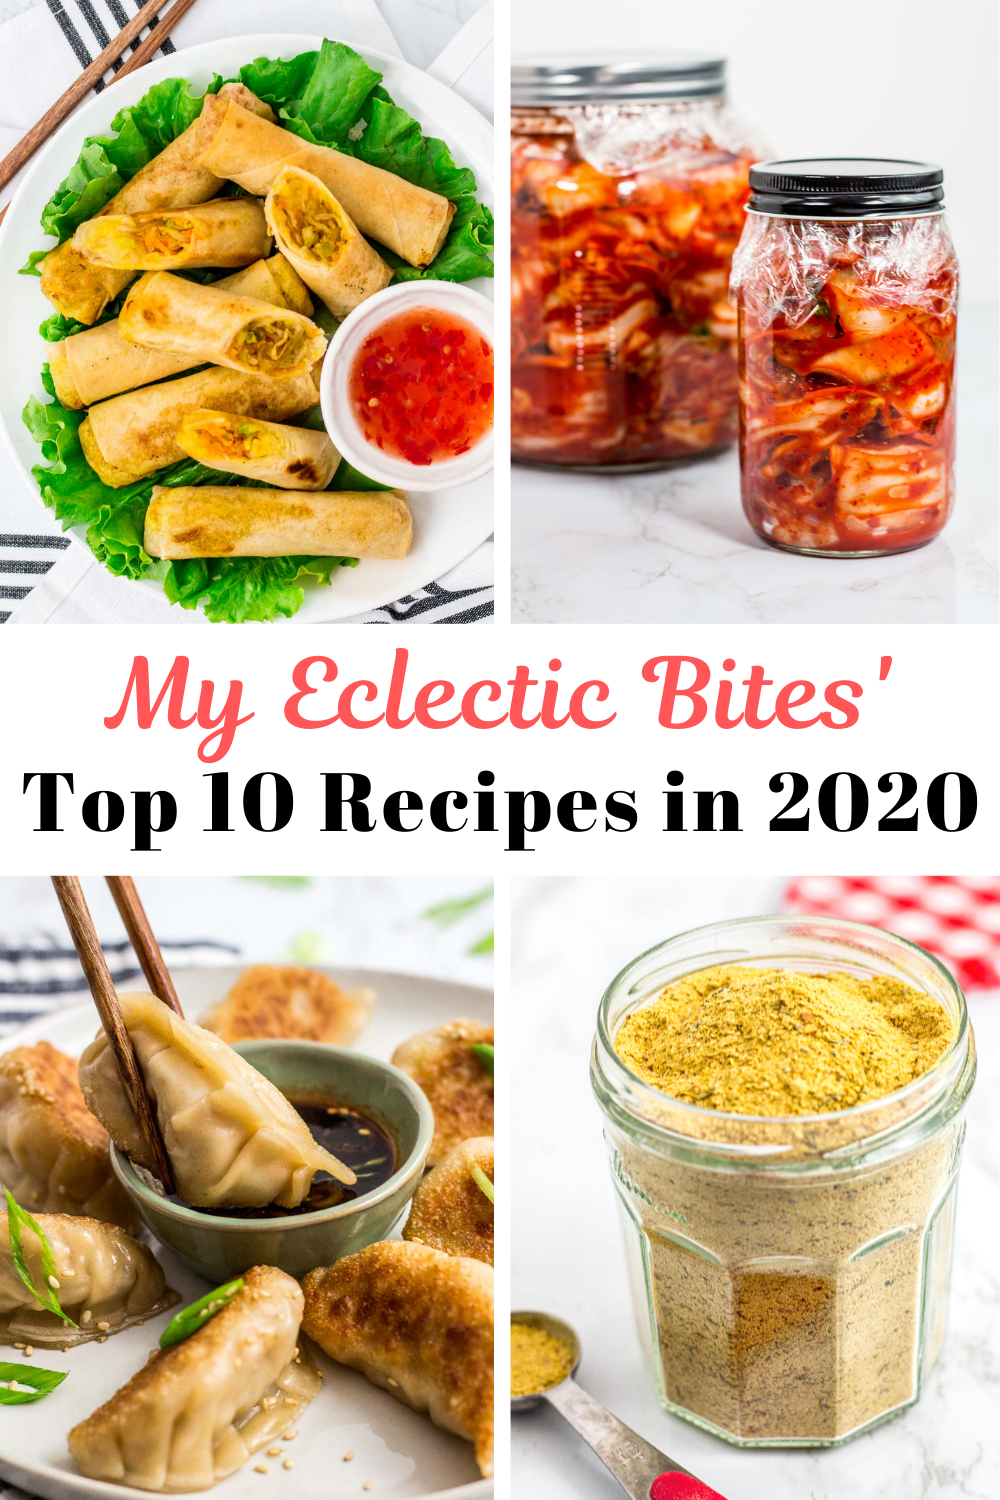 My Eclectic Bites' Top 10 Recipes in 2020